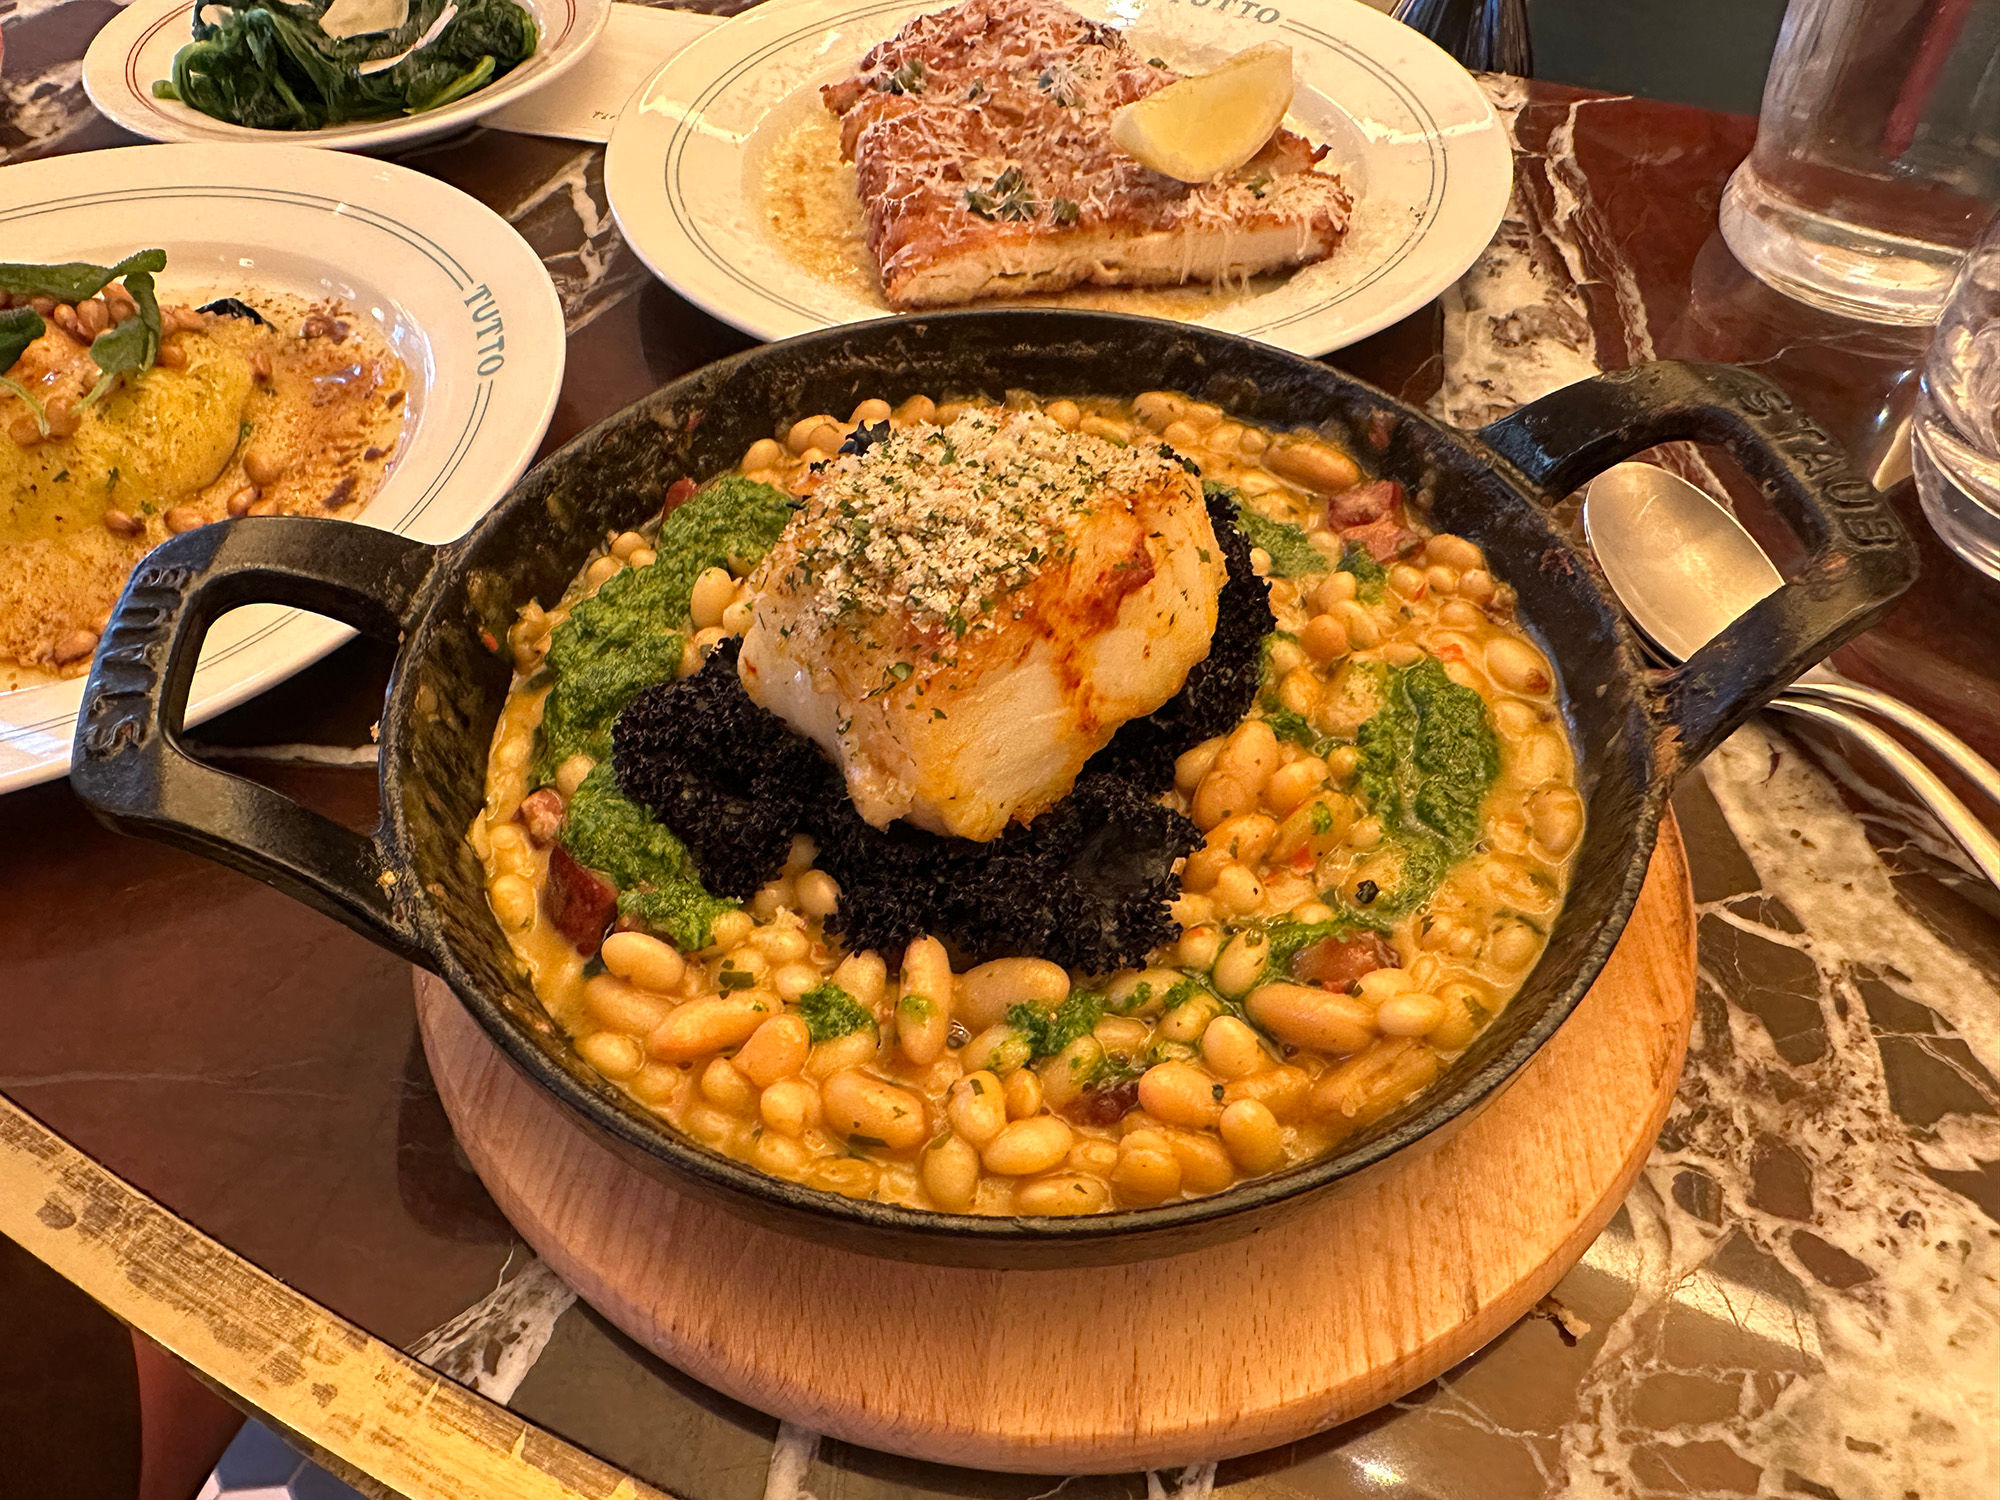 A piece of cod served with white beans in a cast iron dish on a wooden place mat. Served alongside a few Italian sharing plates.